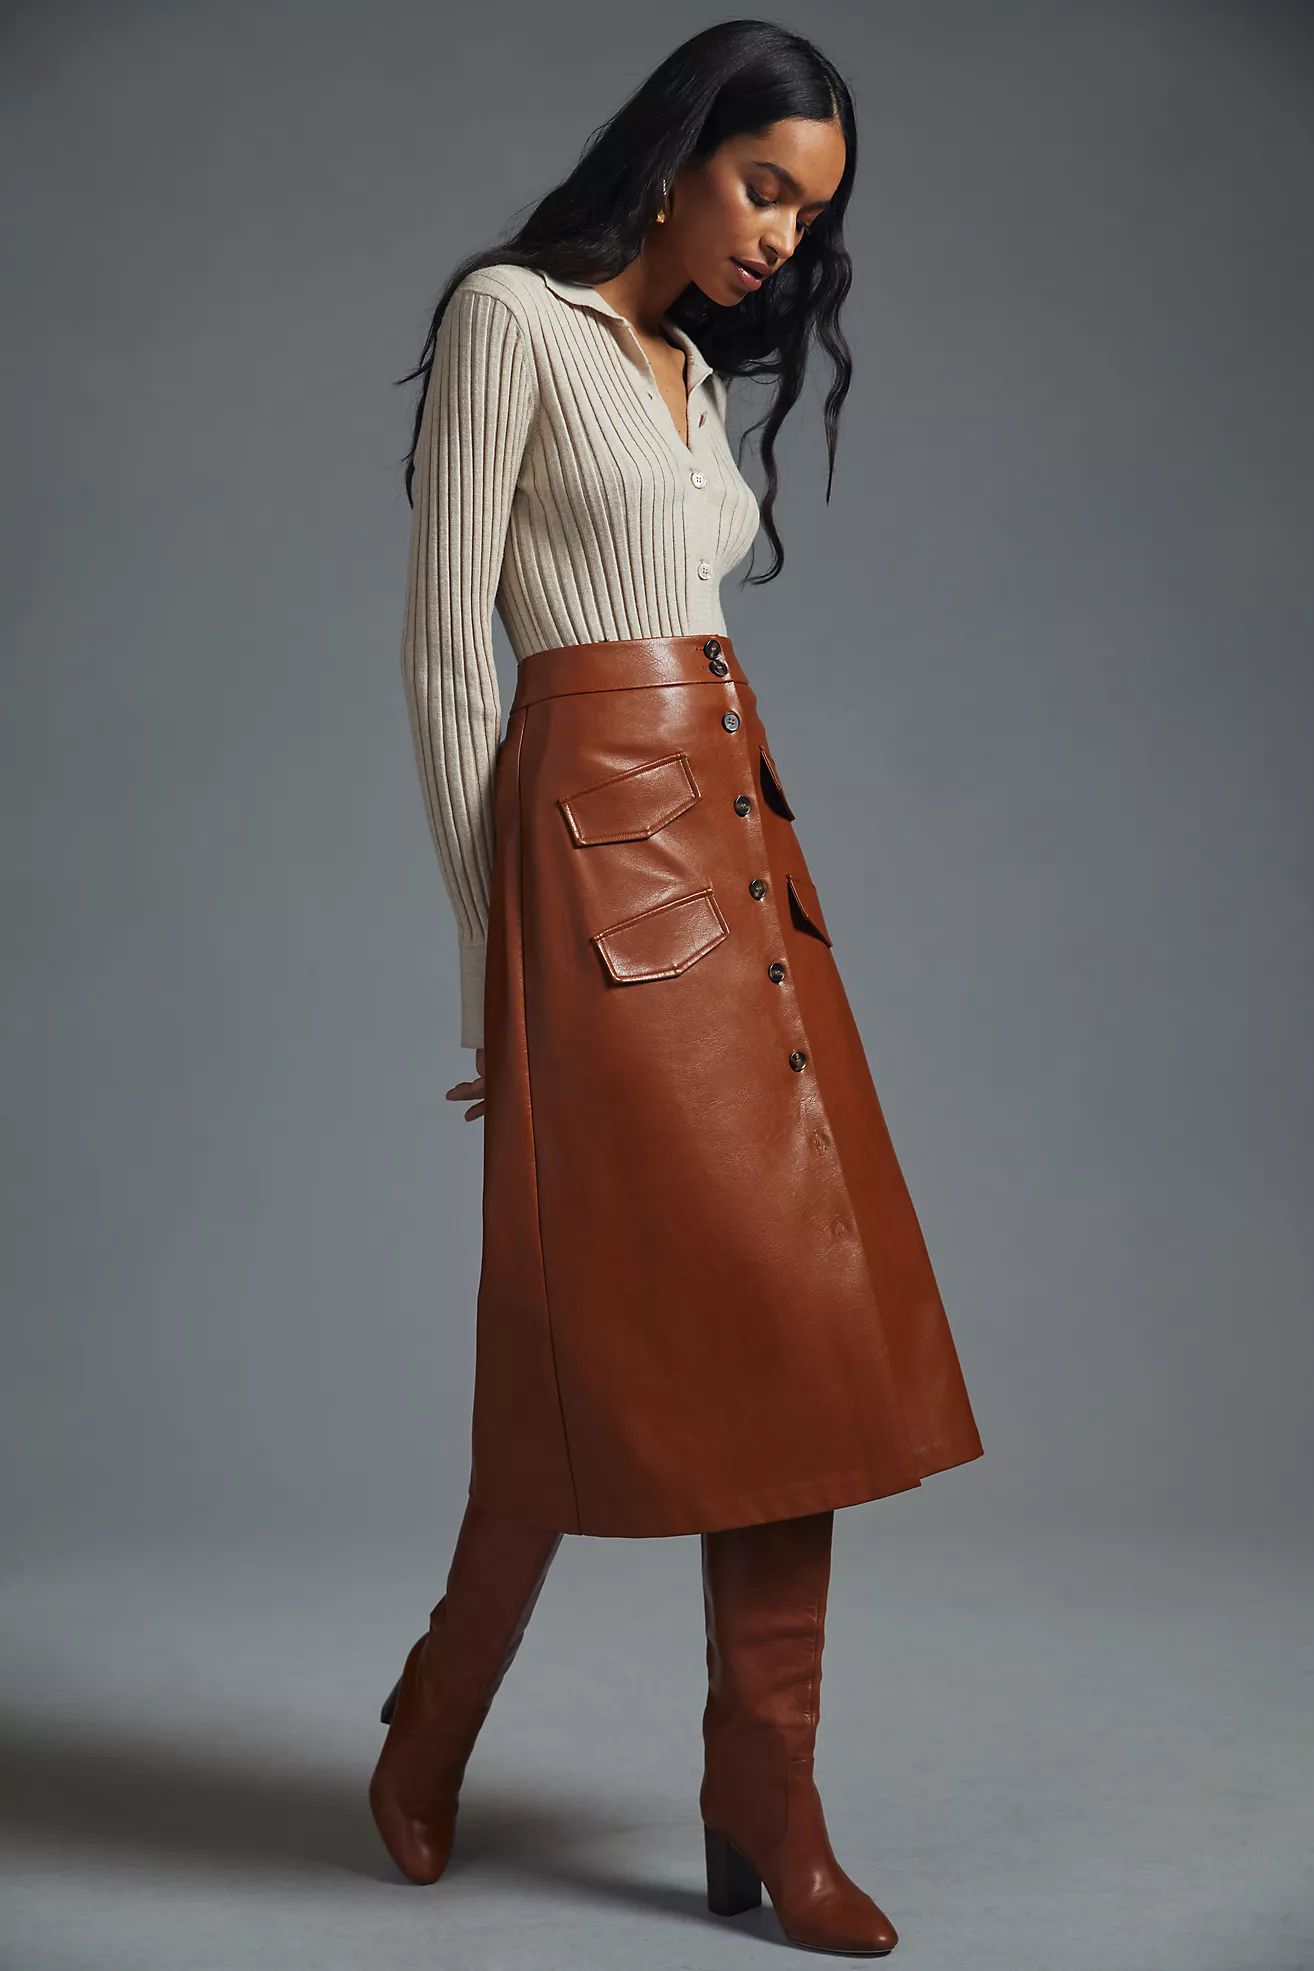 Mare Mare x Anthropologie Faux Leather Skirt | Anthropologie (US)